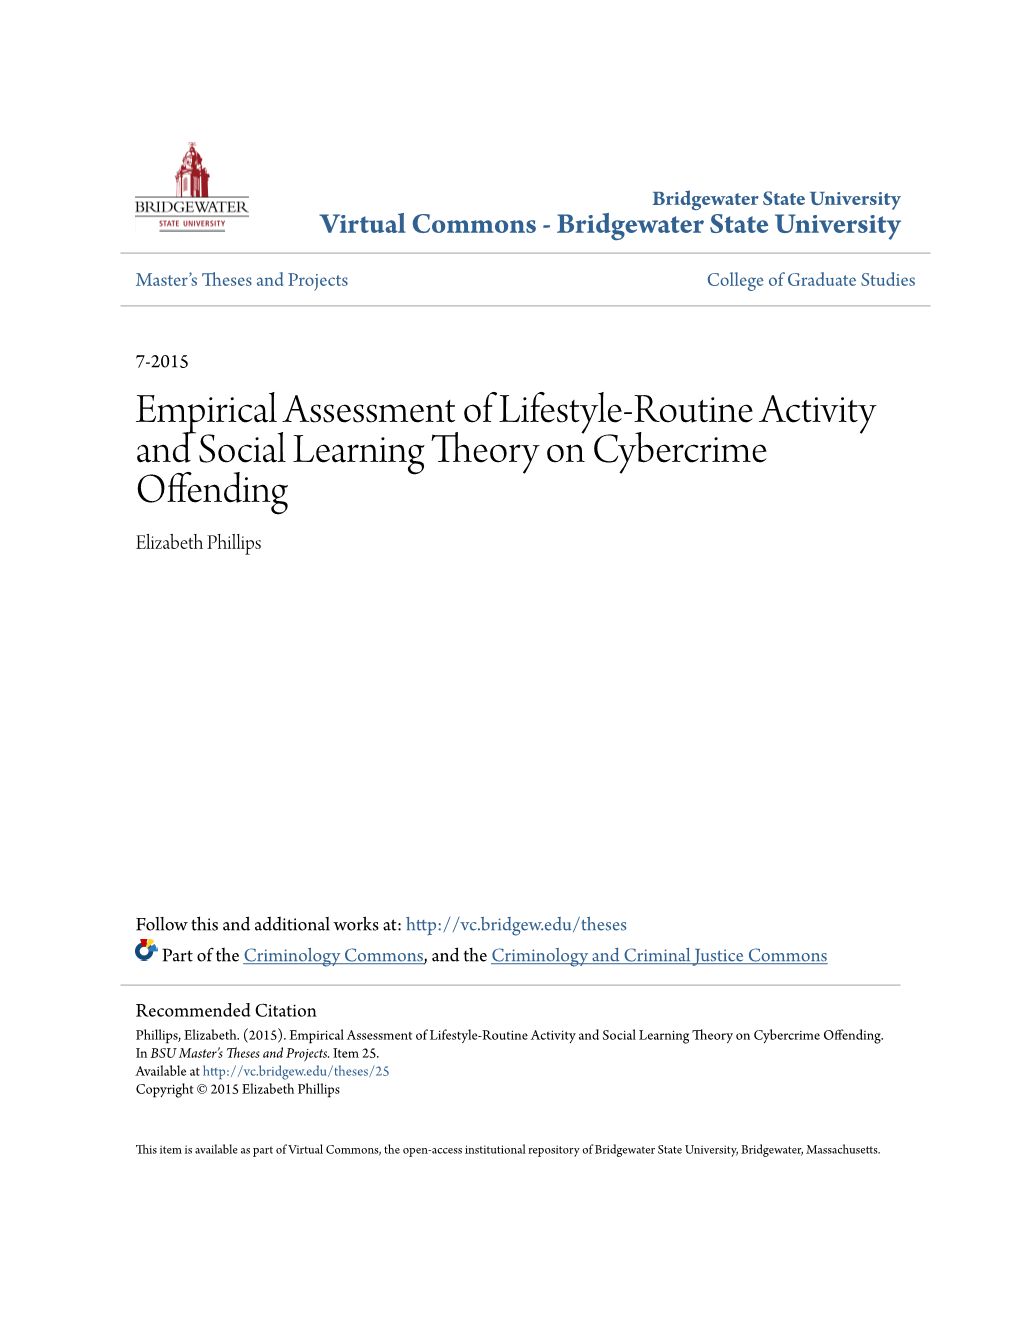 Empirical Assessment of Lifestyle-Routine Activity and Social Learning Theory on Cybercrime Offending Elizabeth Phillips